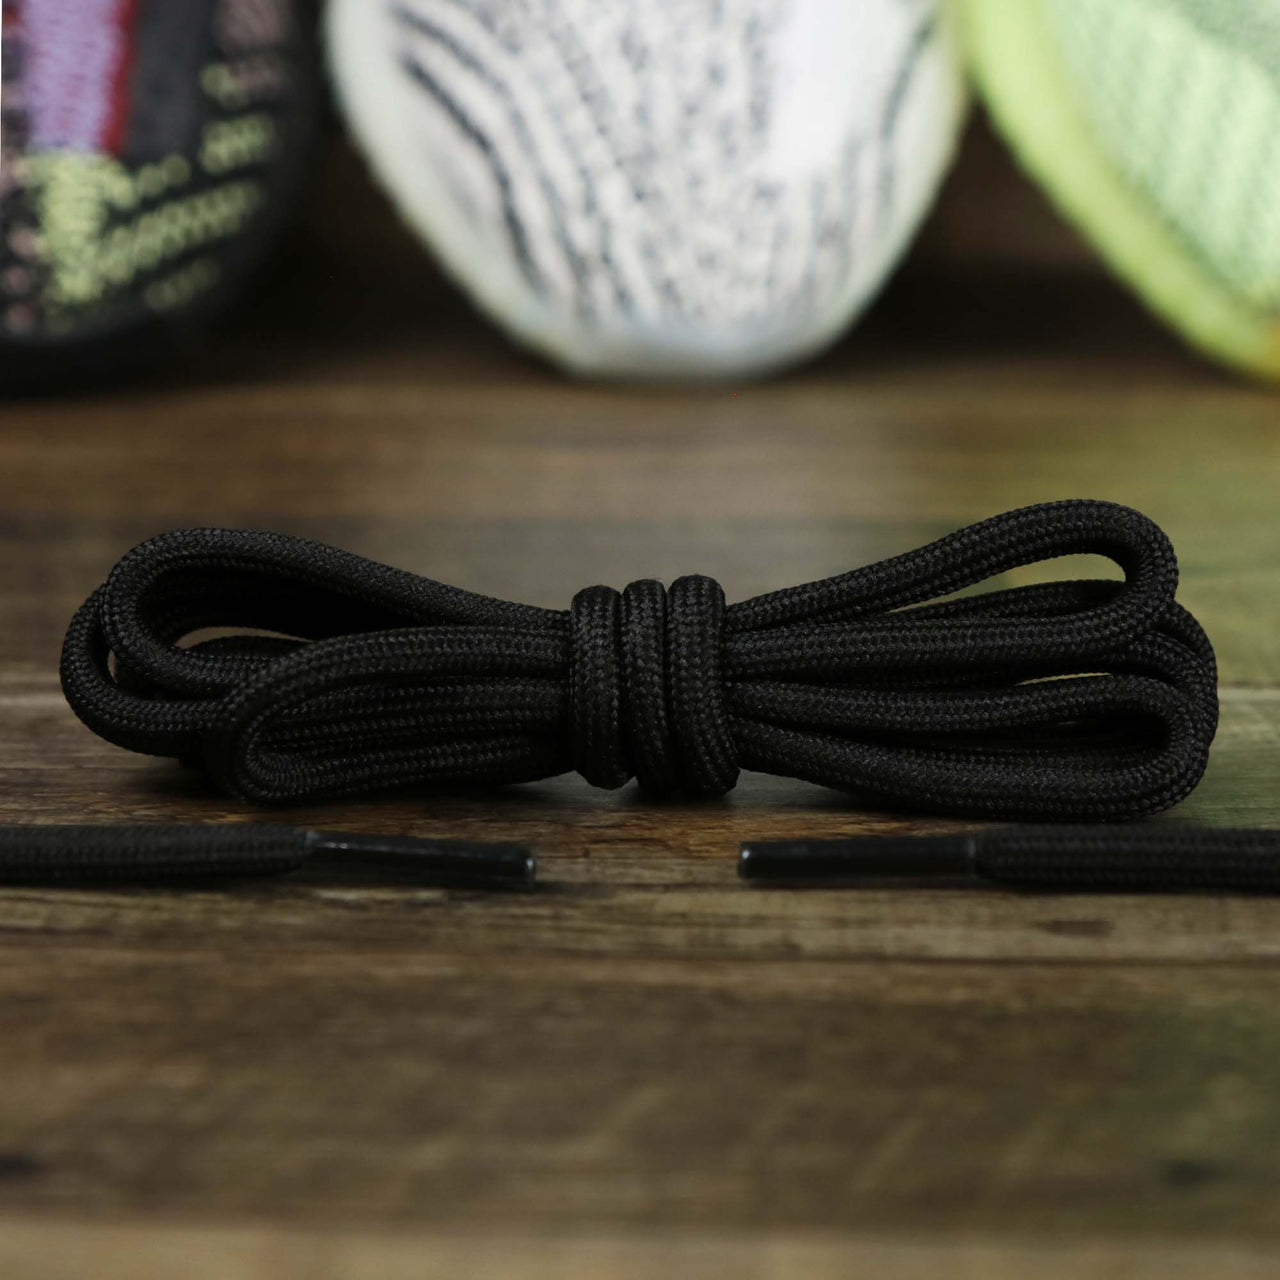 The Solid Rope Black Shoelaces with Black Aglets | 120cm Capswag